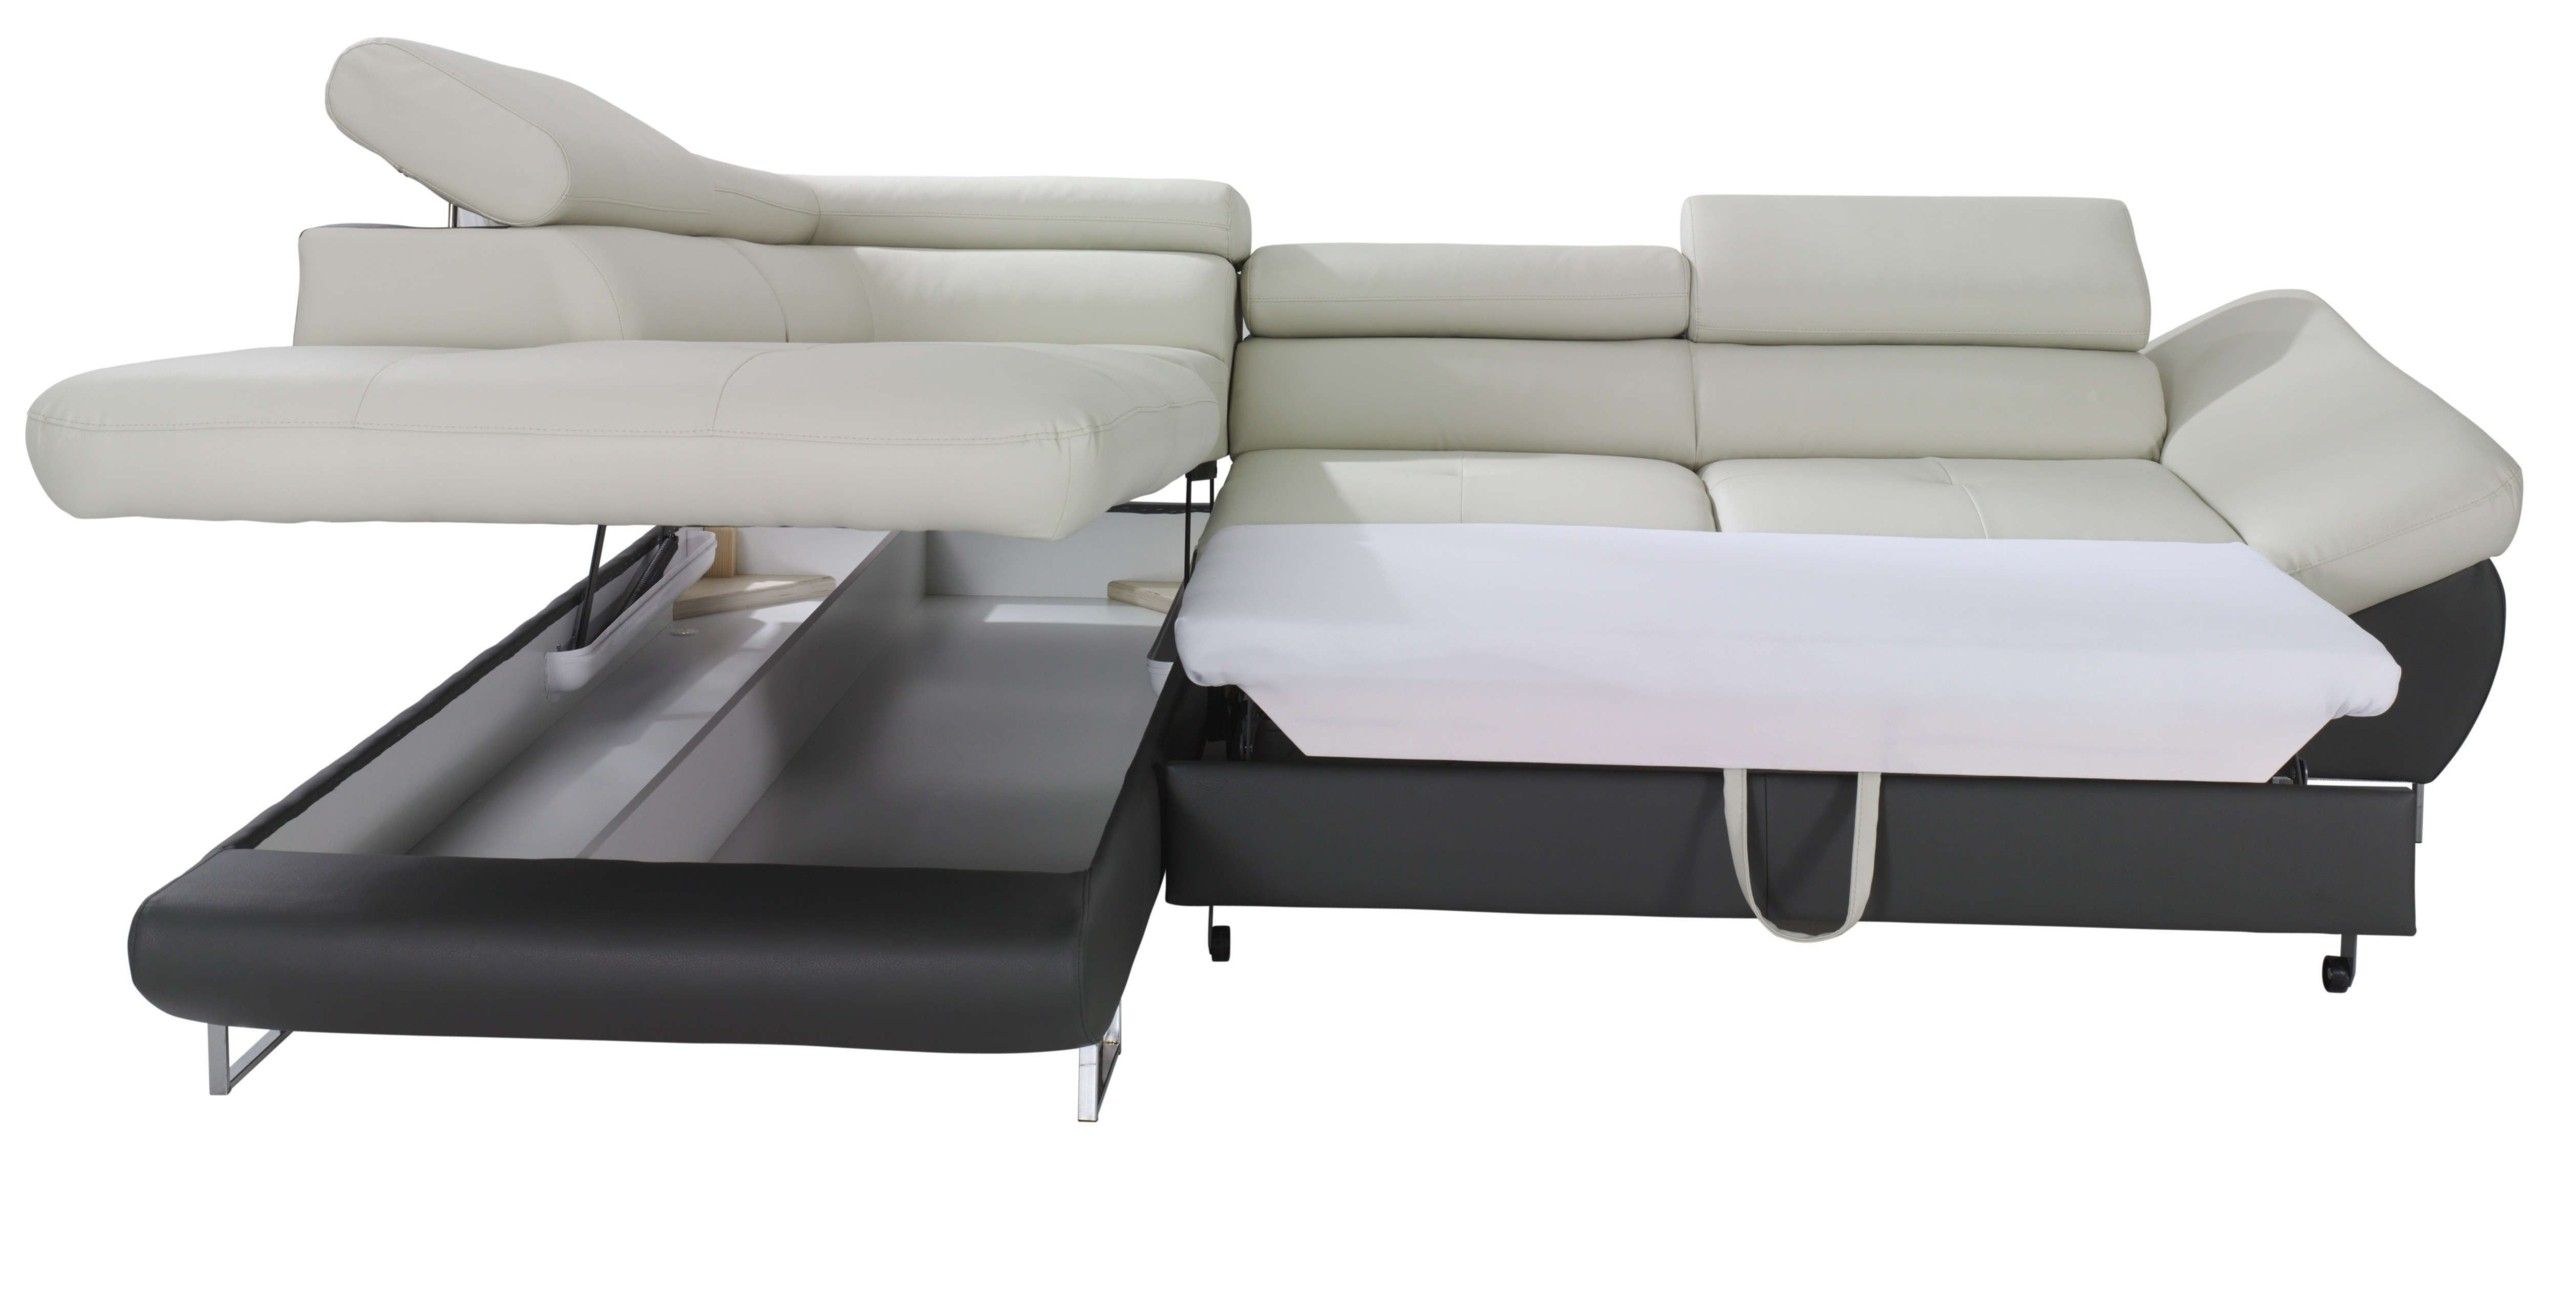 Sectional Sofas With Storage – Ideas On Foter Regarding Sofa Sectionals With Storage (View 6 of 15)